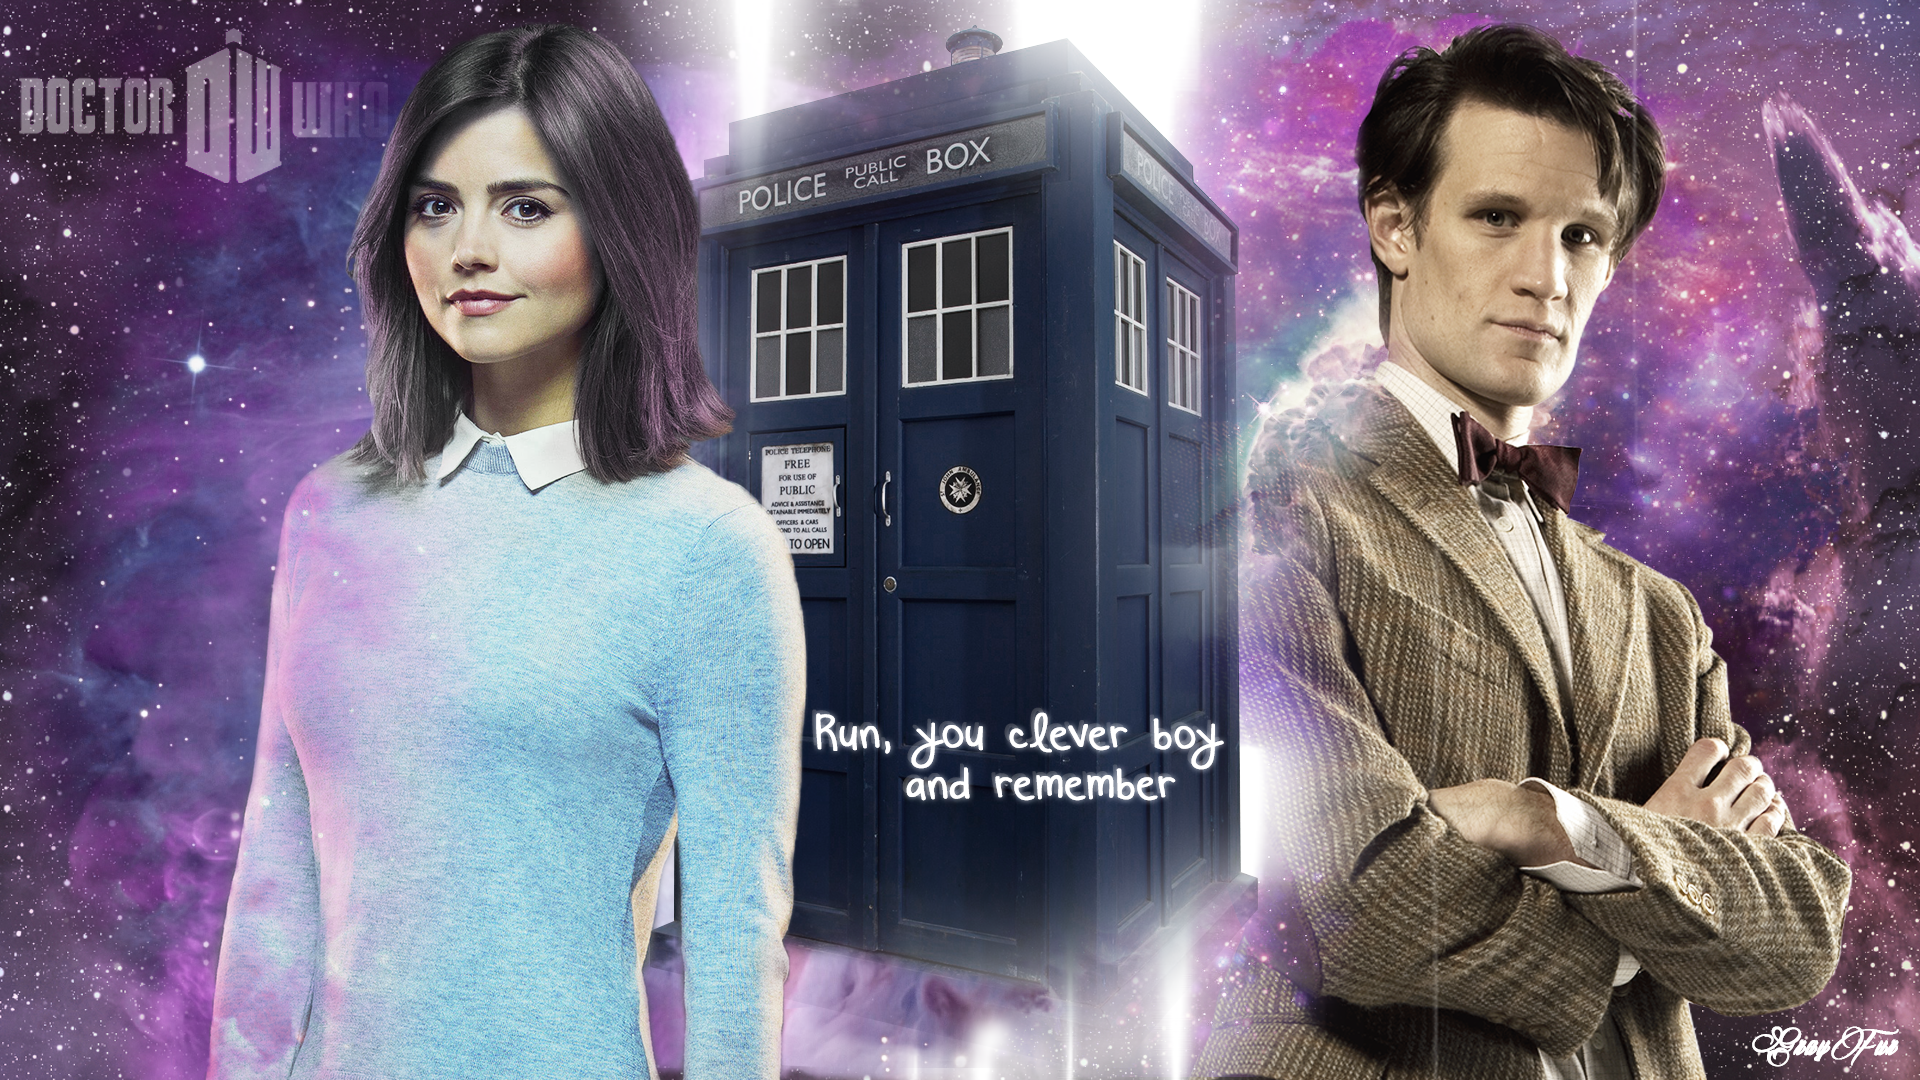 Doctor Who Wallpaper full HD (with Clara) HD Wallpaper